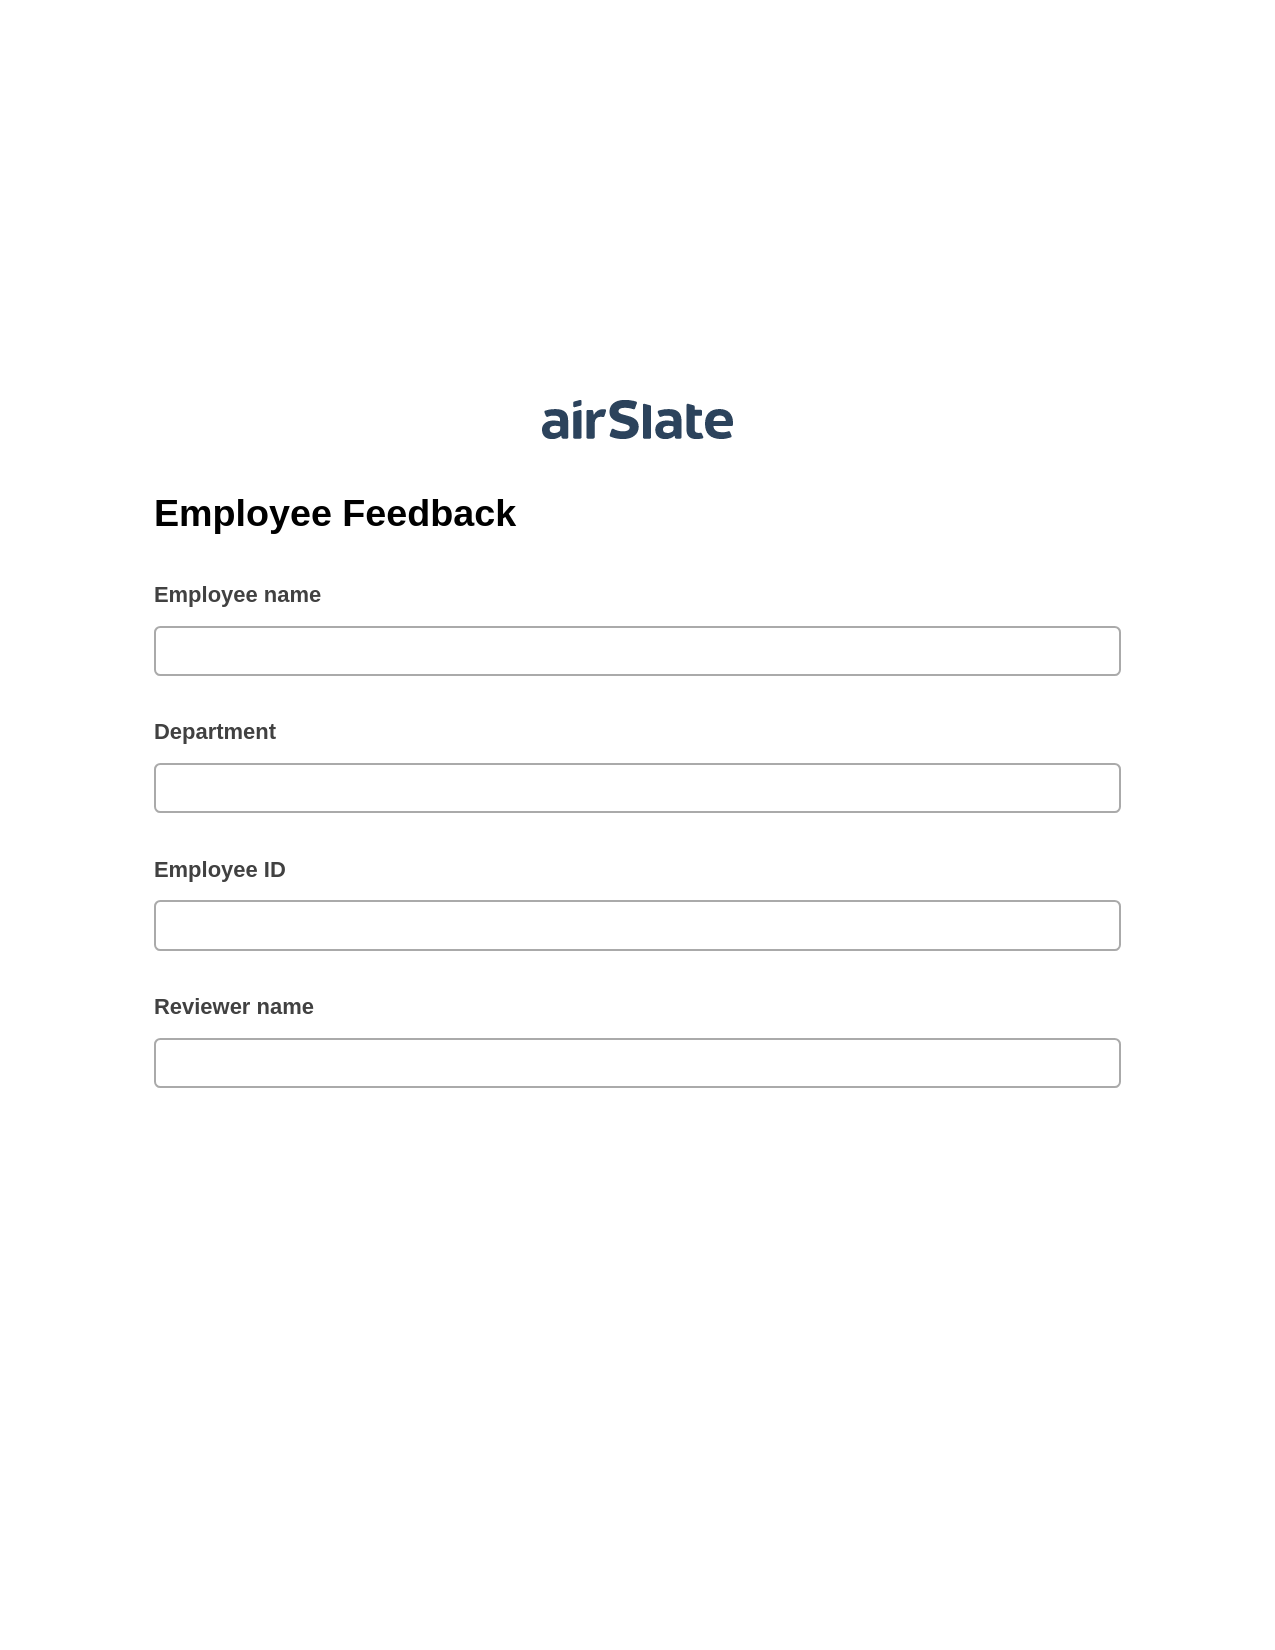 Multirole Employee Feedback Pre-fill Slate from MS Dynamics 365 Records Bot, Assign Roles to Recipients Bot, Post-finish Document Bot